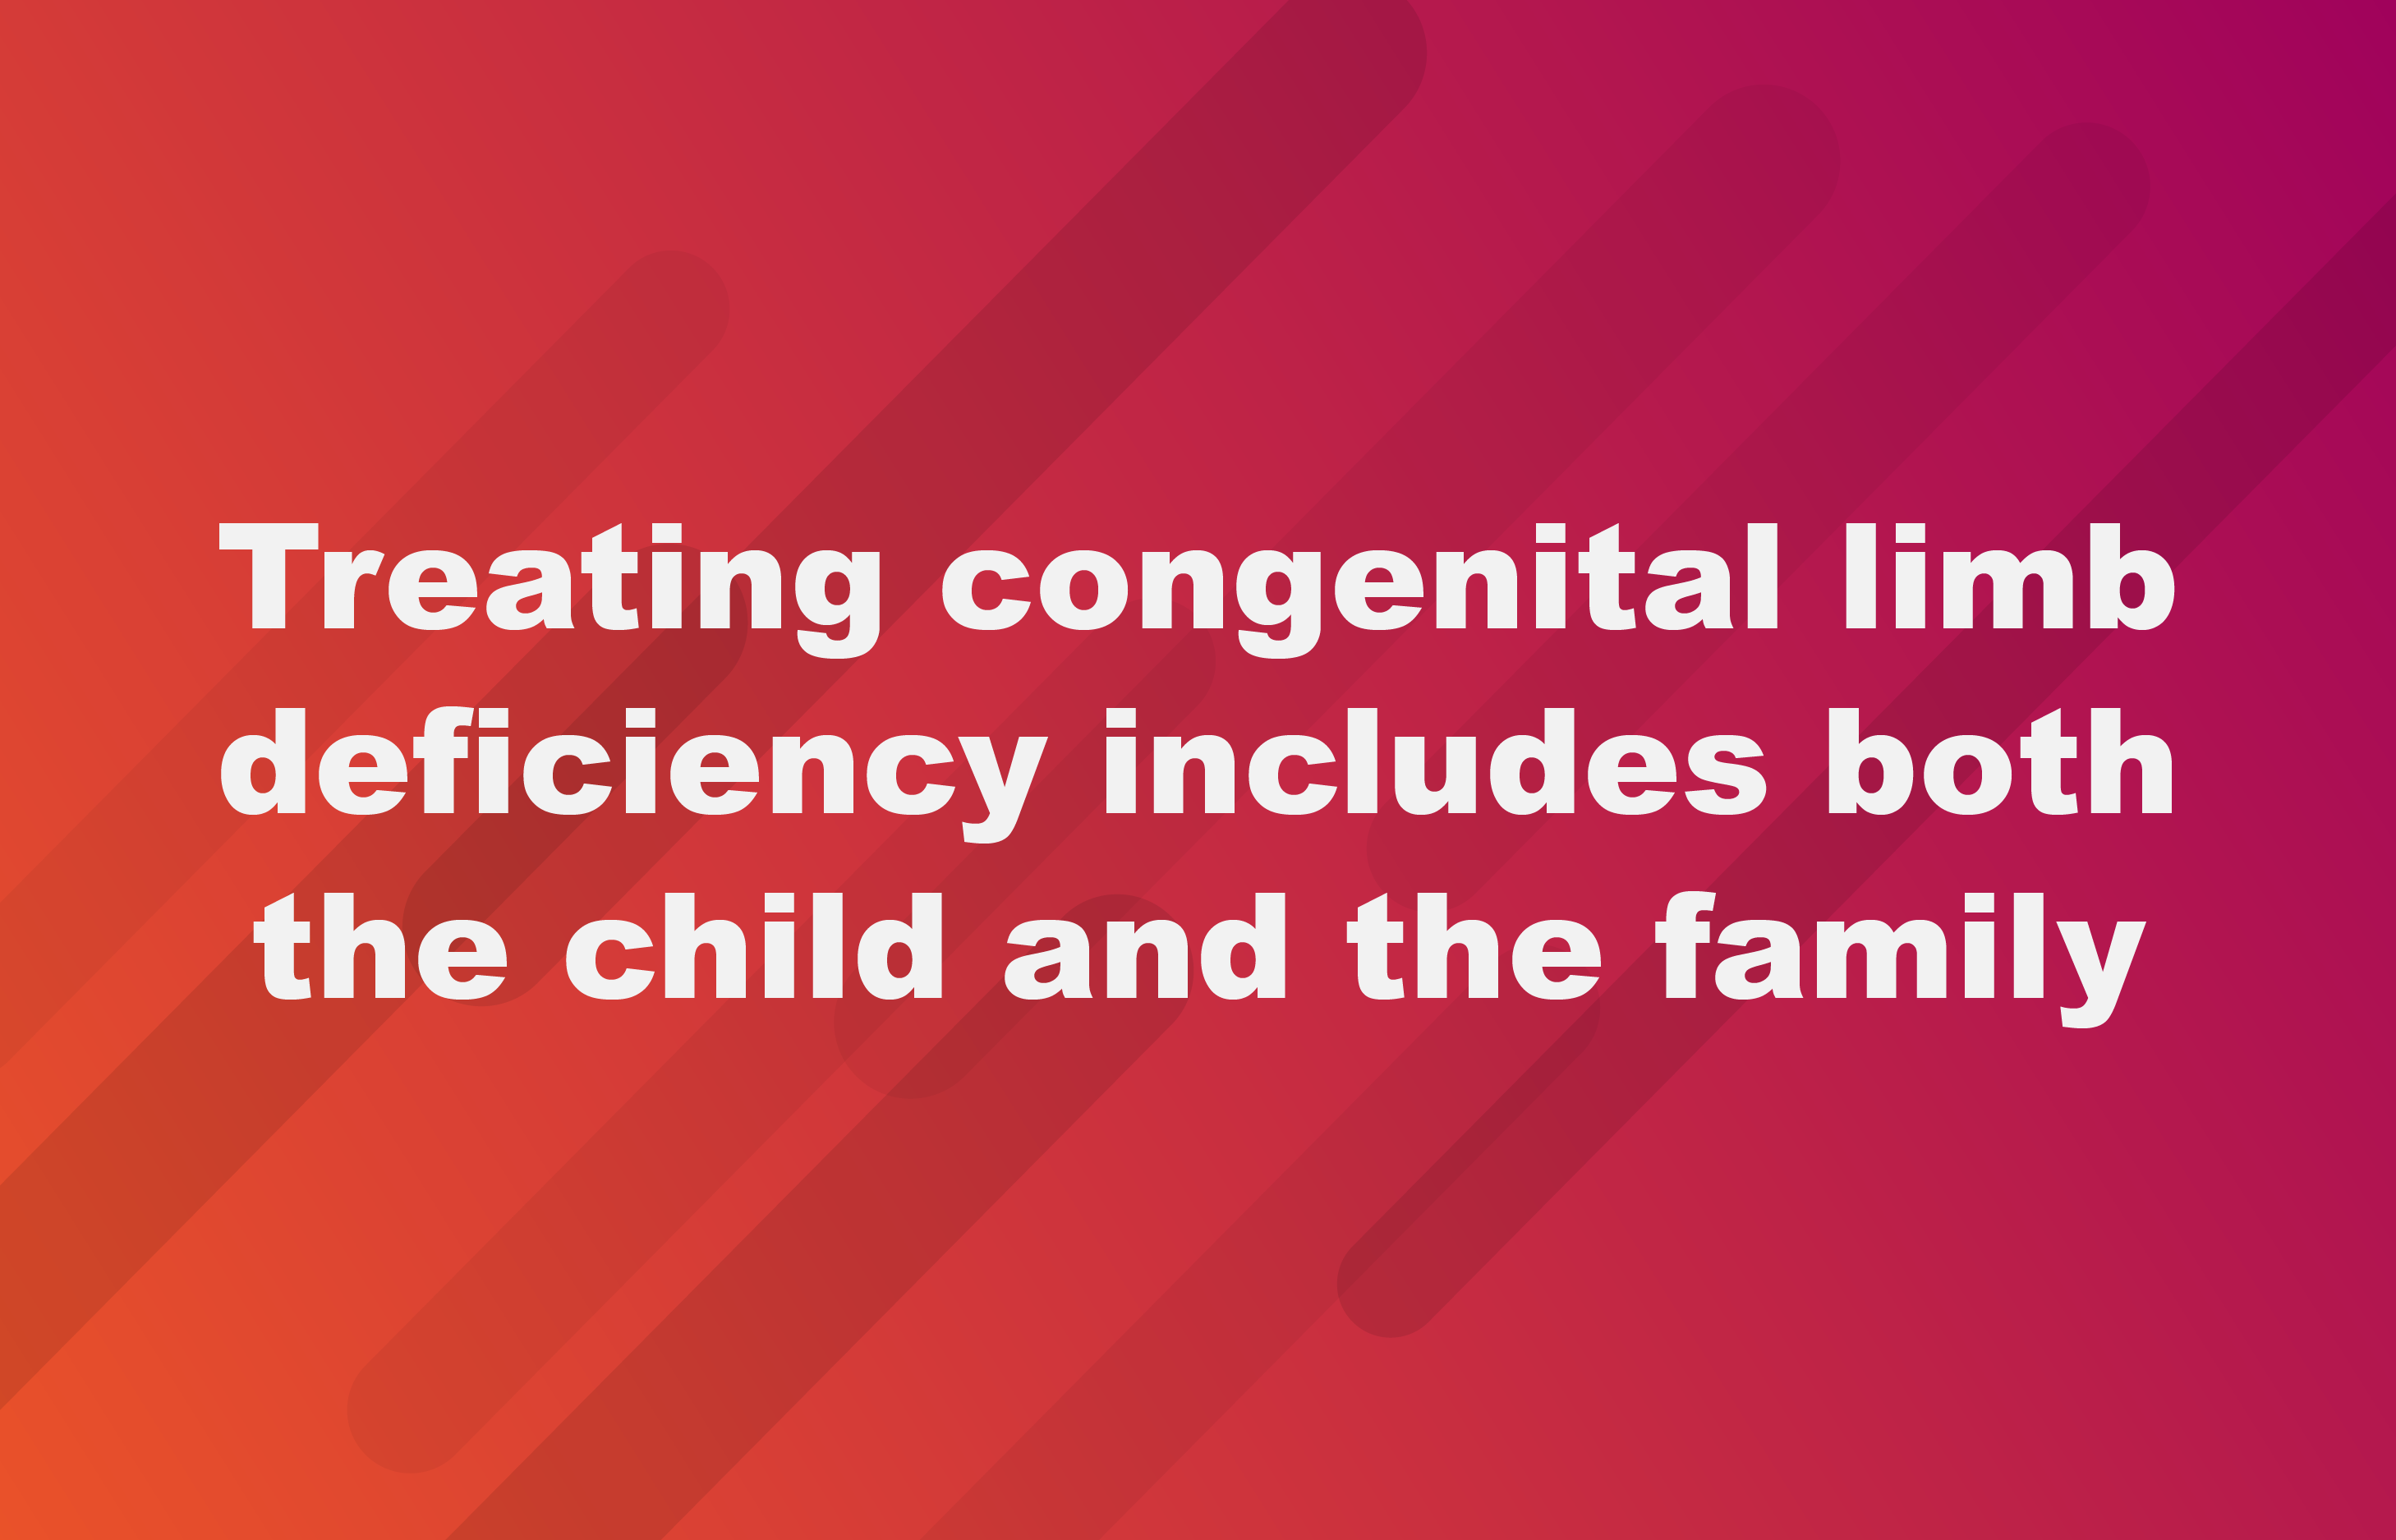 Treating congenital limb deficiency includes both the child and the family